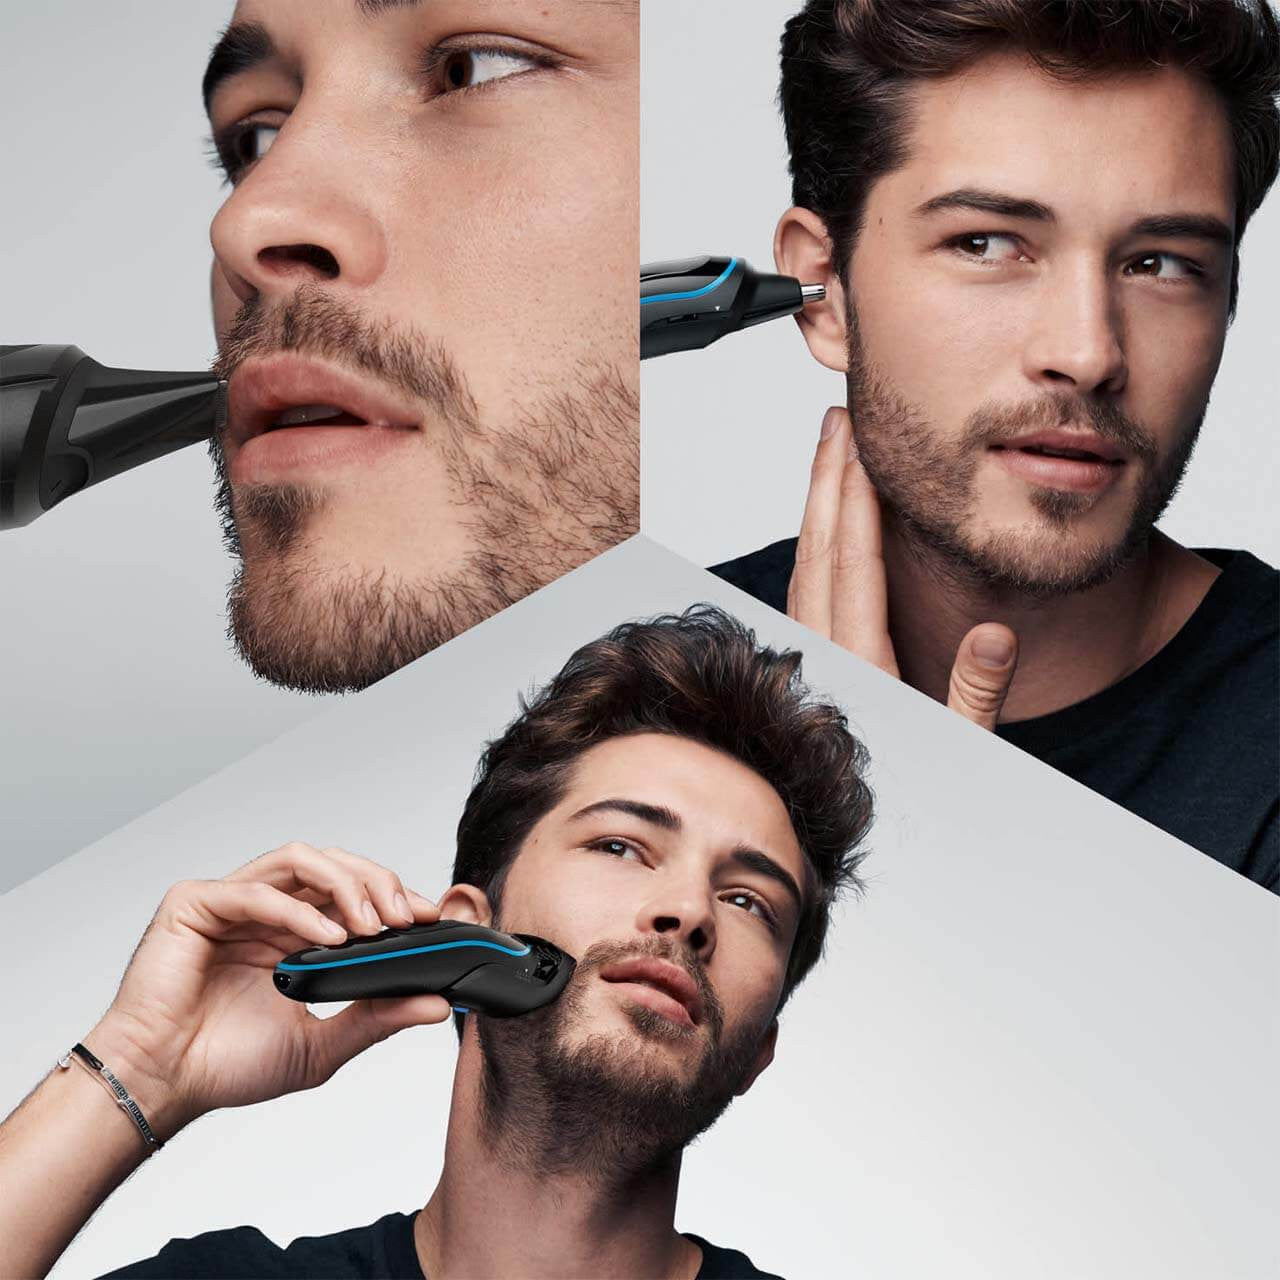 Braun All-in-one trimmer 5 for Face, Hair, and Body, 9-in-1